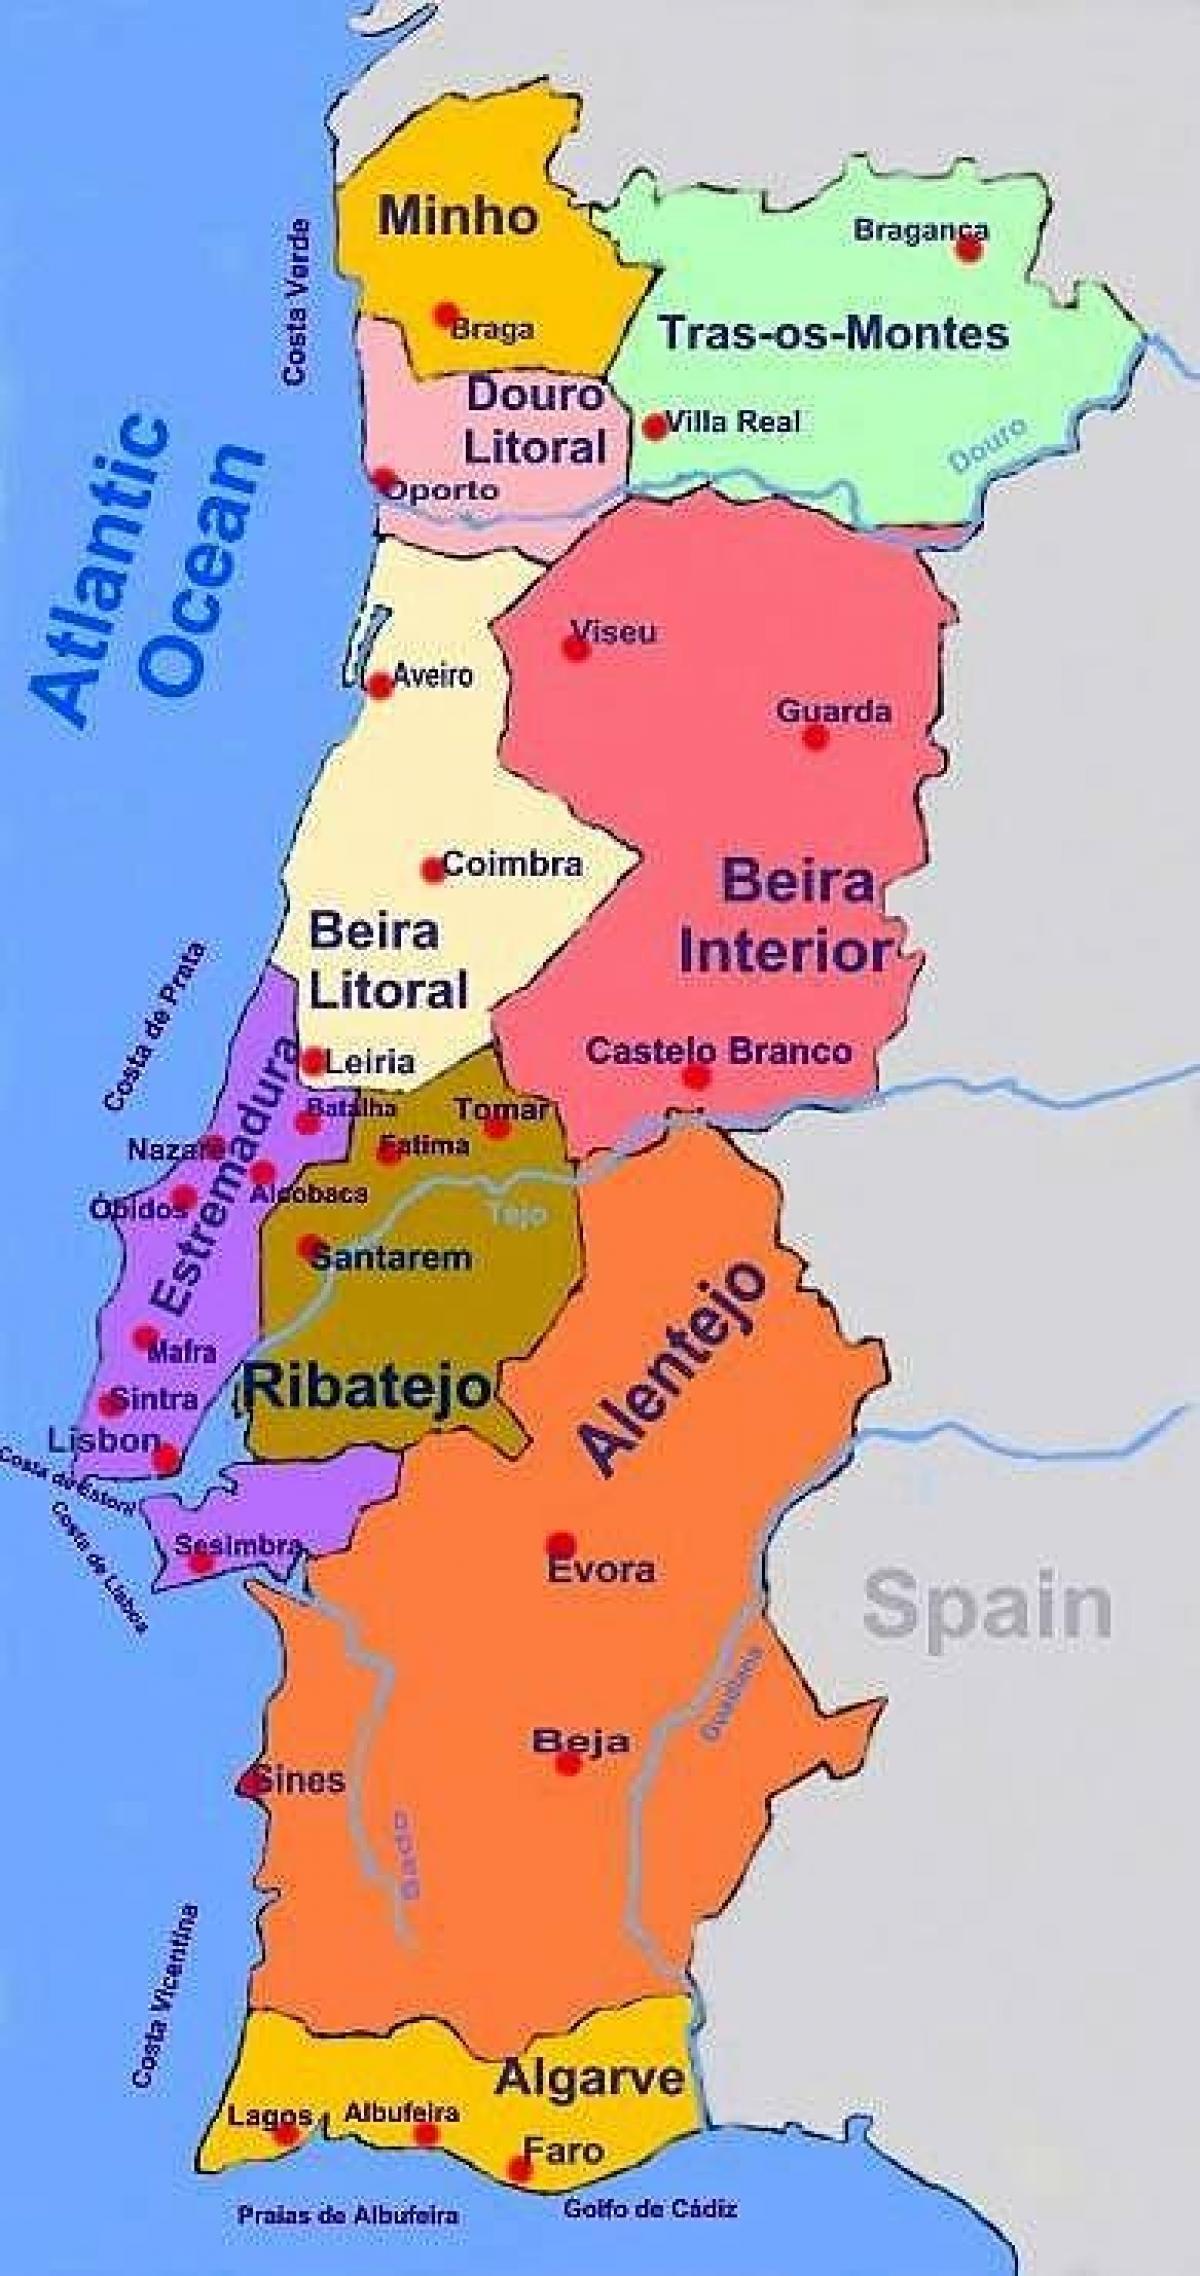 portugal-areas-map-areas-of-portugal-map-southern-europe-europe